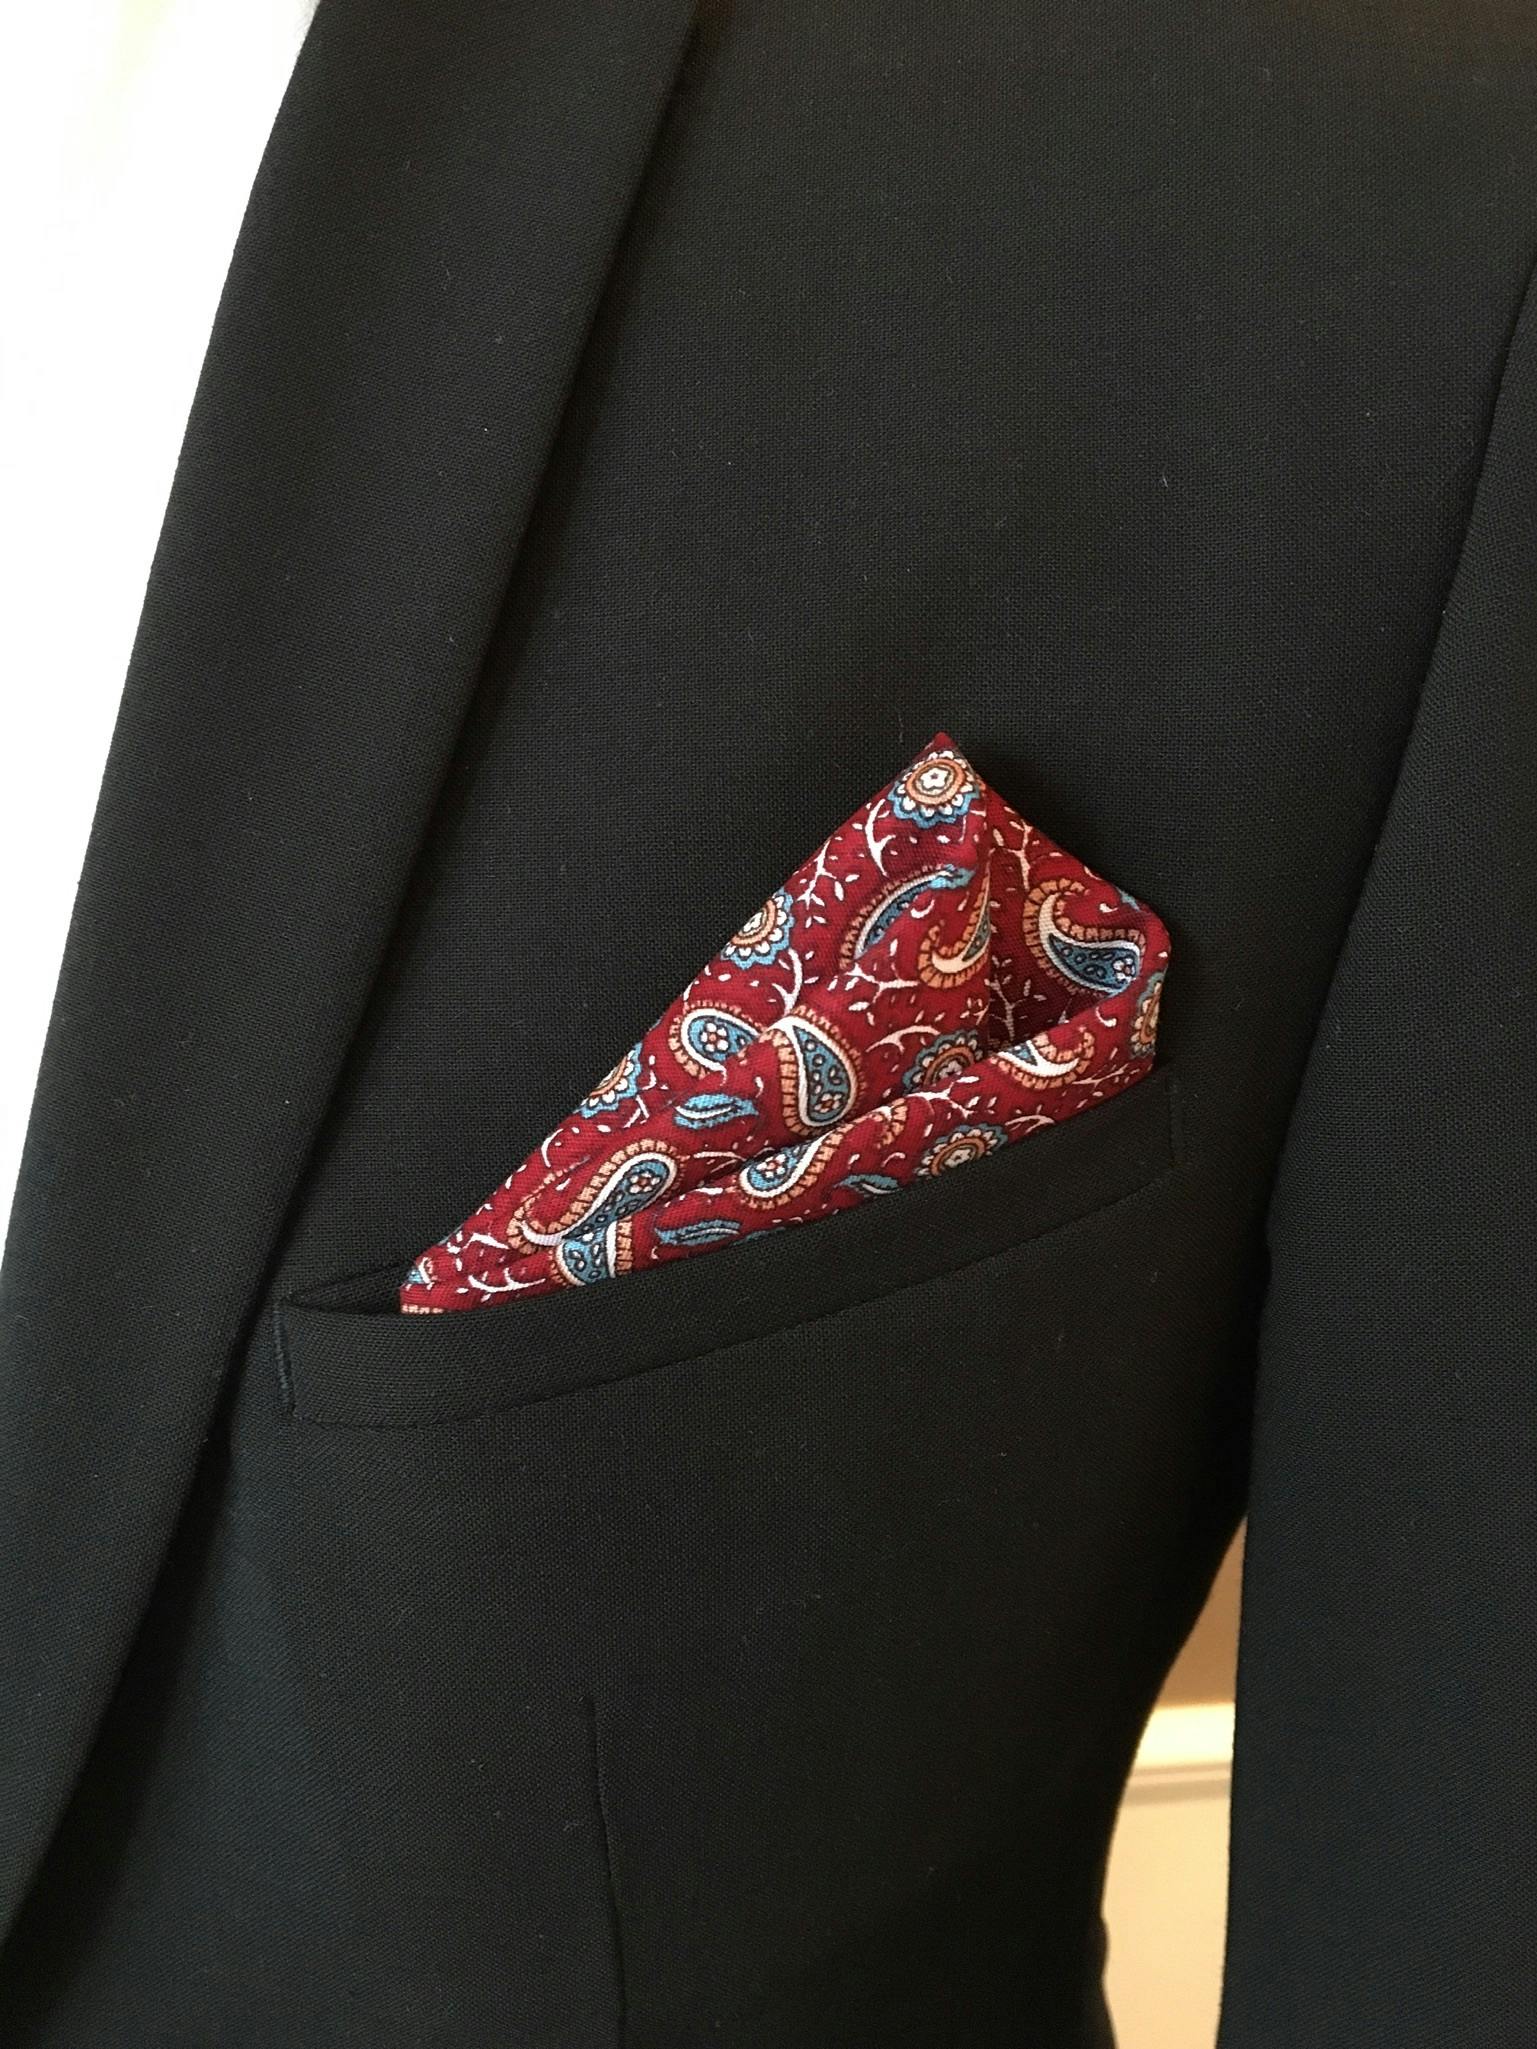 Pockie - Classic Red Paisley